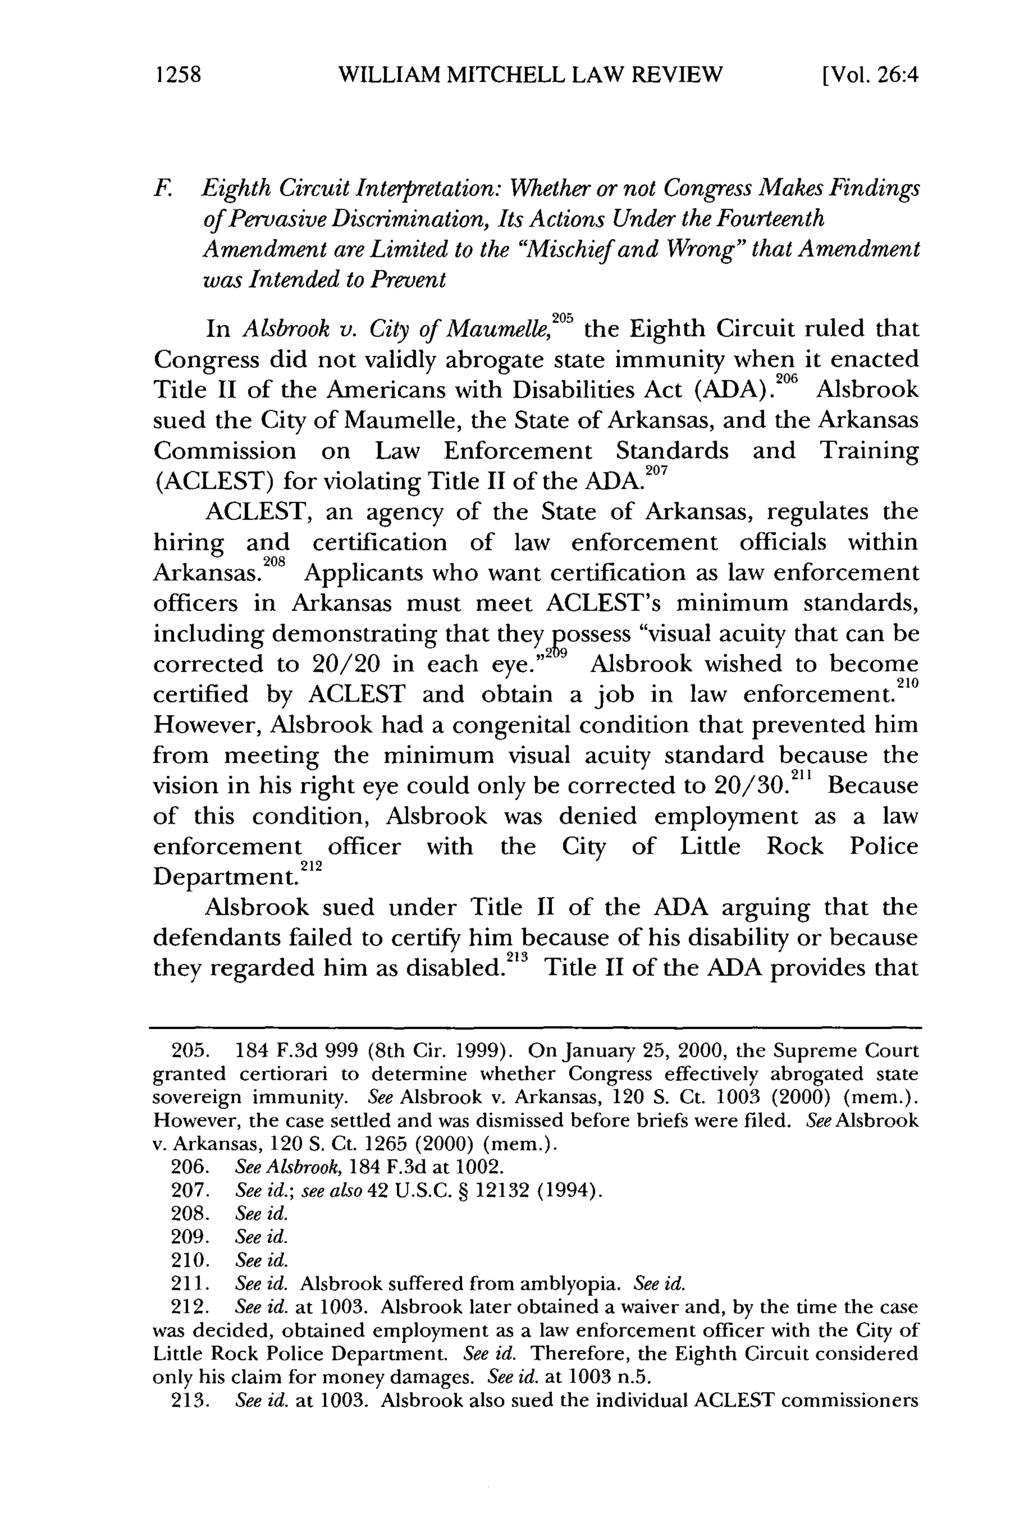 1258 William Mitchell Law Review, Vol. 26, Iss. 4 [2000], Art. 12 WILLIAM MITCHELL LAW REVIEW [Vol. 26:4 F.